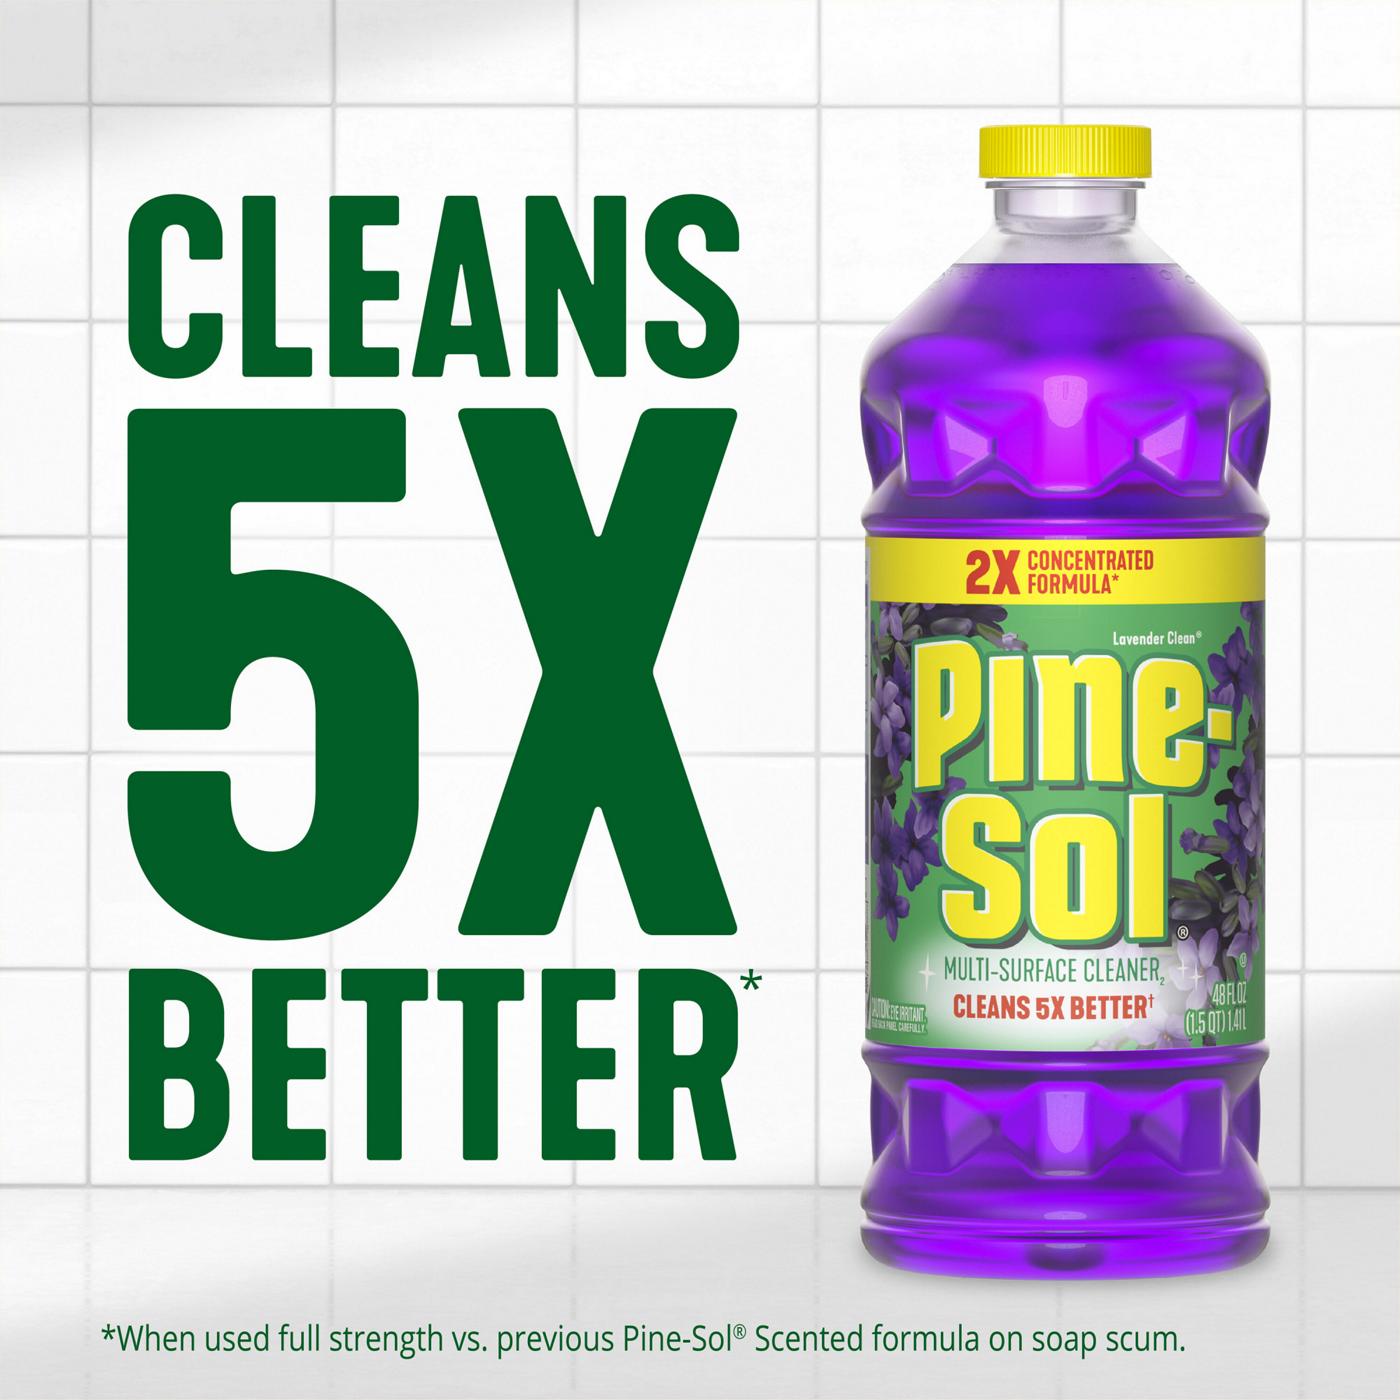 Pine-Sol Lavender Clean Multi-Surface Cleaner; image 4 of 9